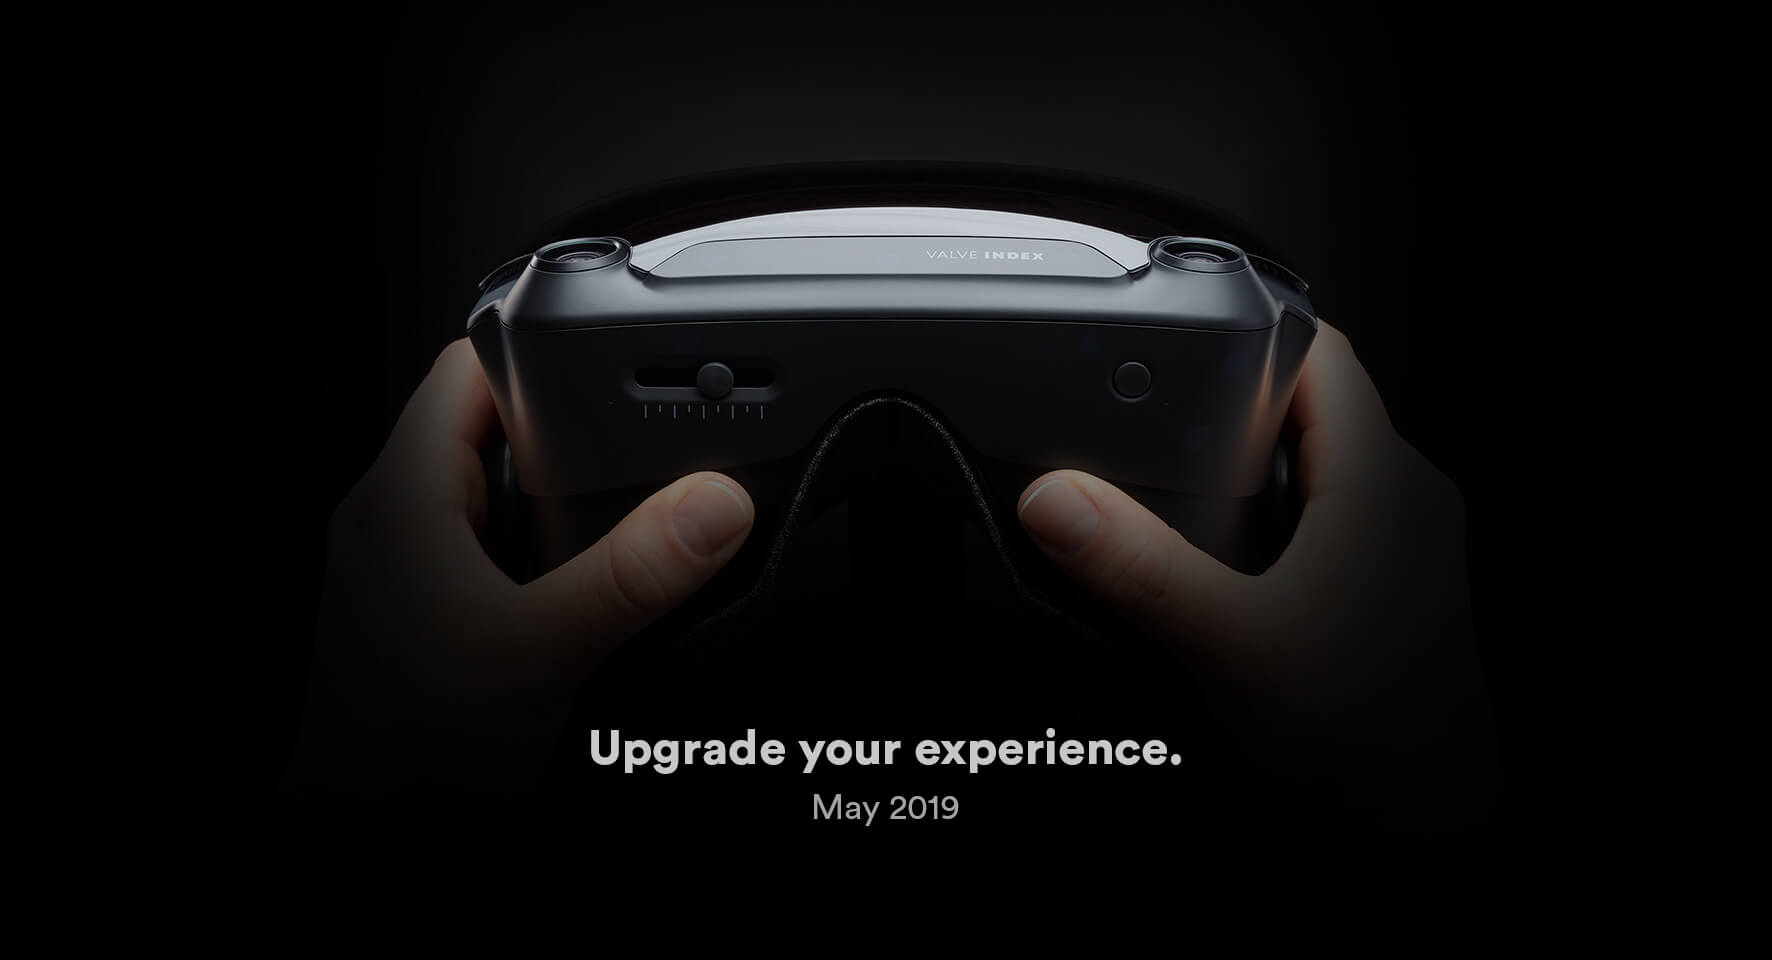 Valve has developed its own high-end VR headset called 'Index', set for May reveal